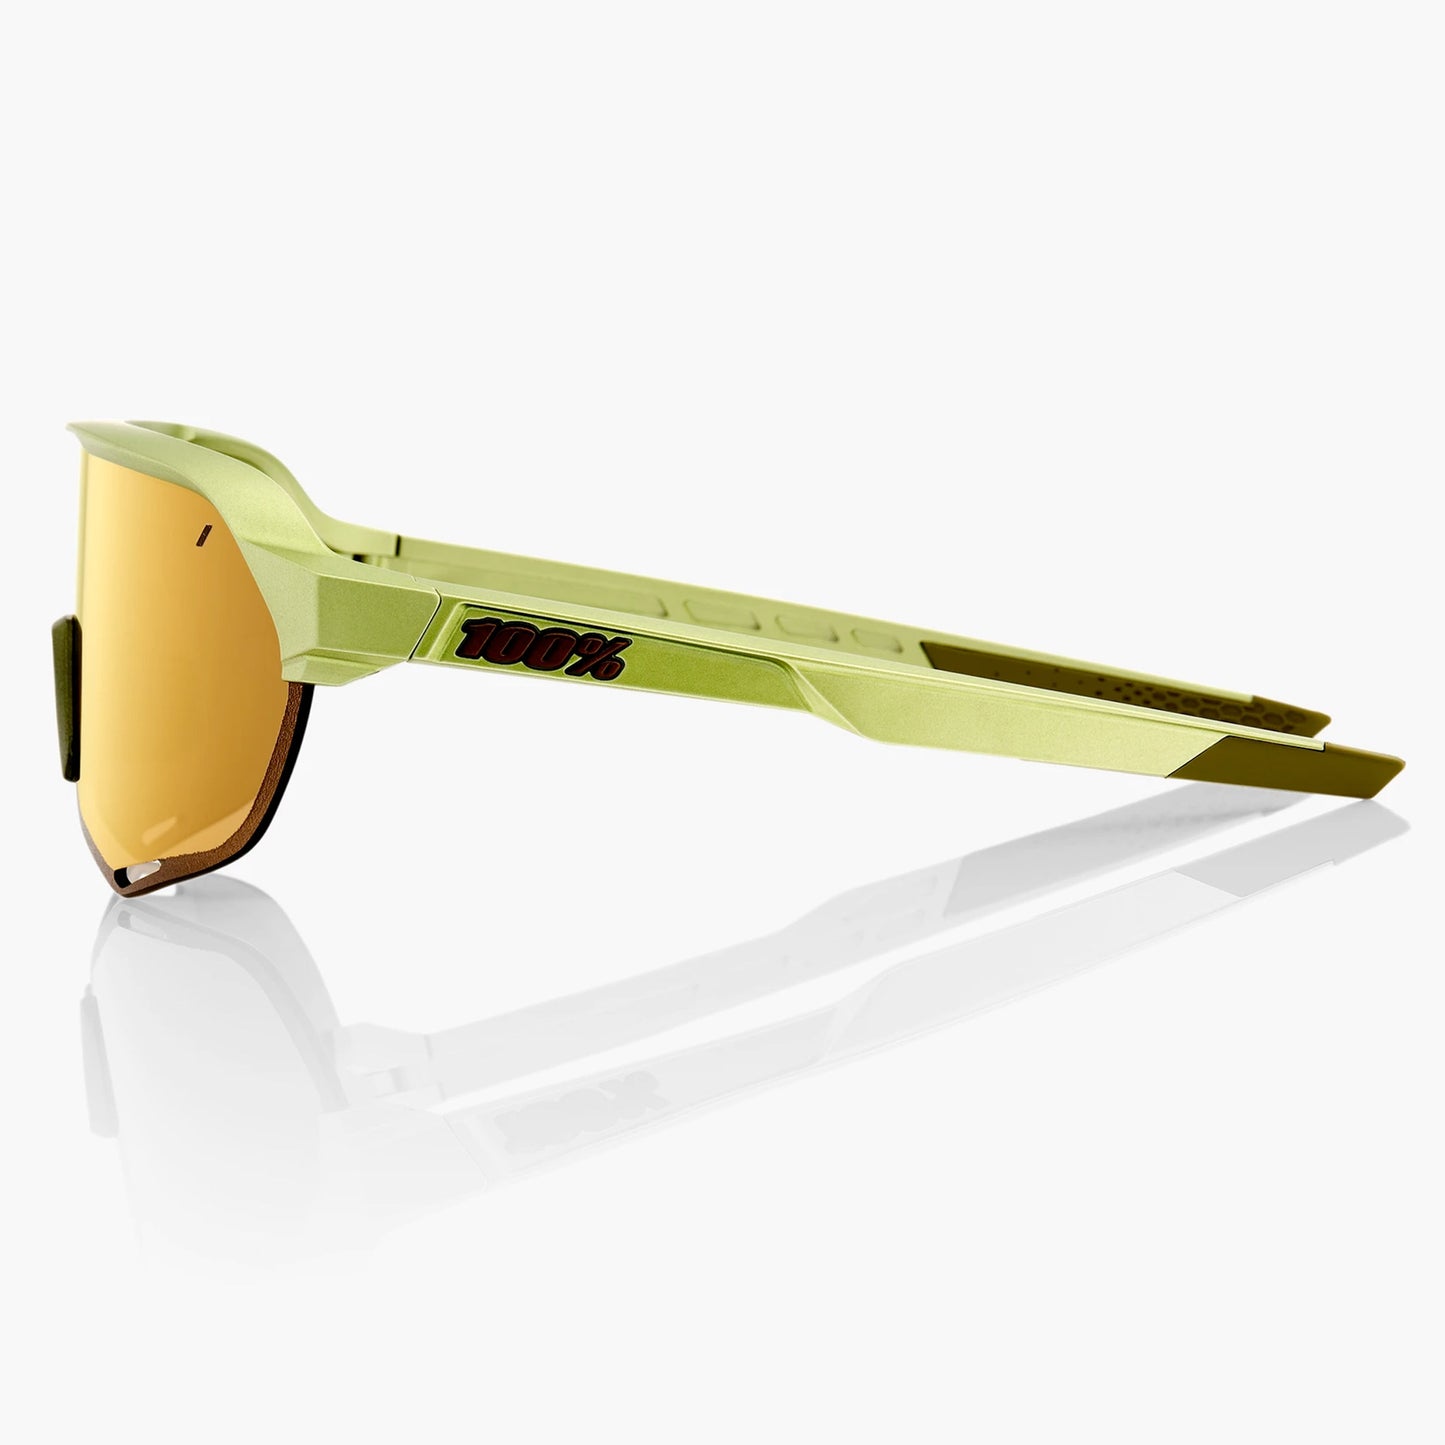 100% S2 - Matte Metallic Viperidae Bronze Multilayer Mirror Lens + Clear lens Cycling Sunglasses